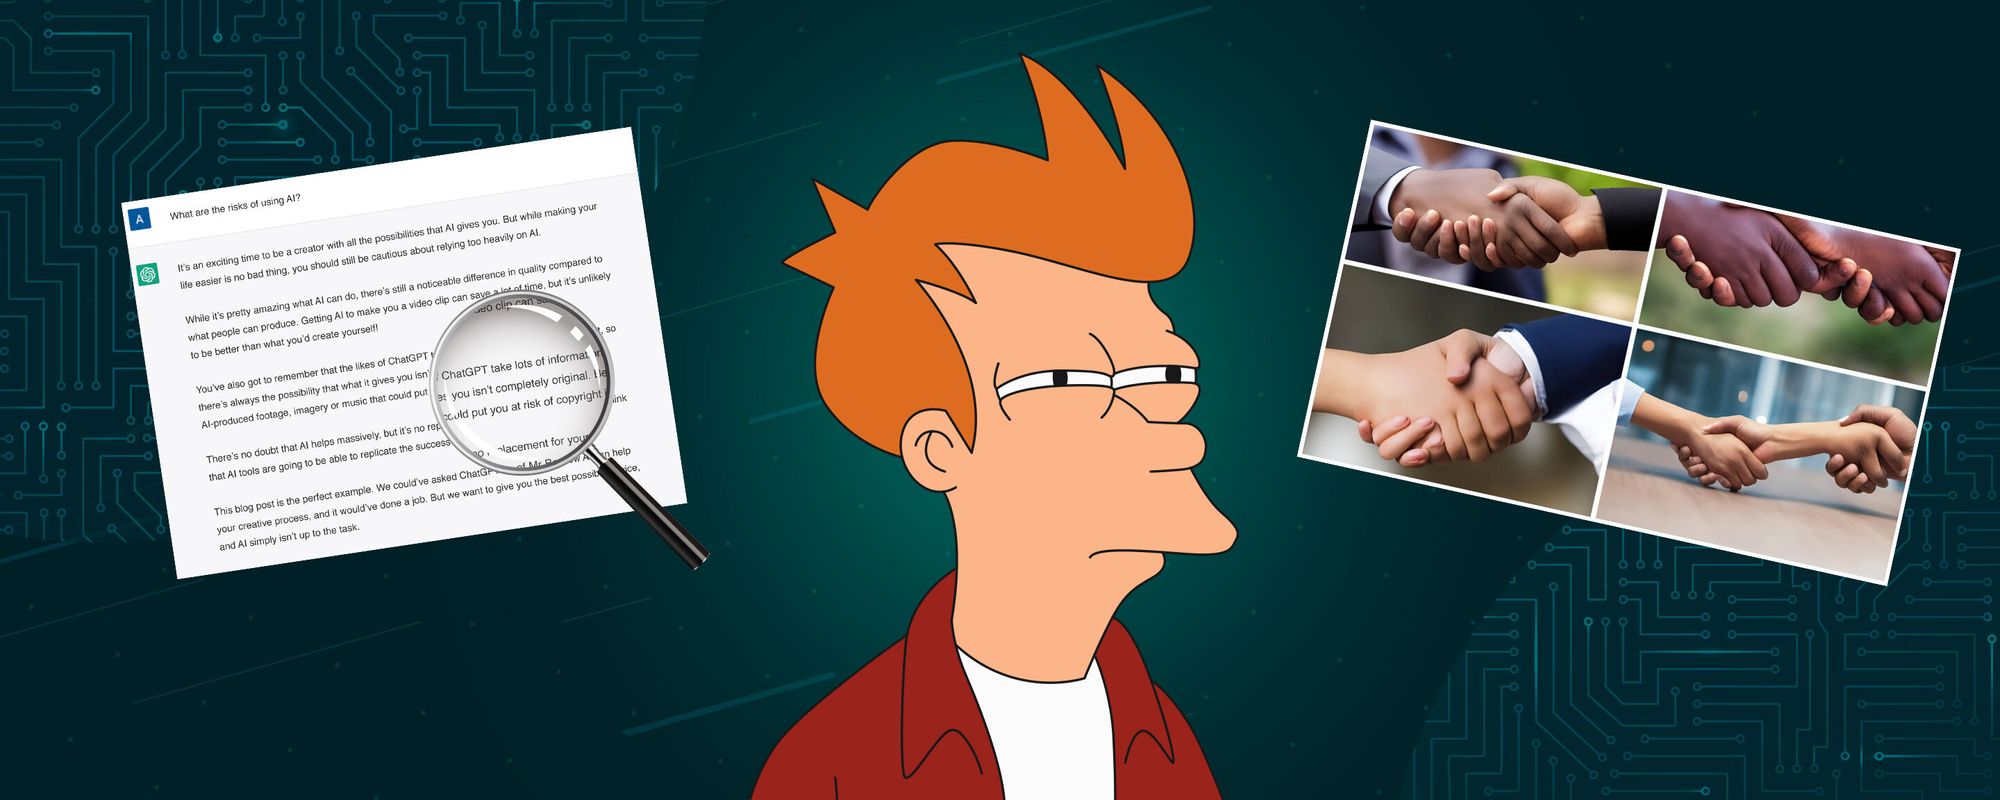 A meme image of Fry from Futurama looking confused at an AI-generated image and AI-generated copy.